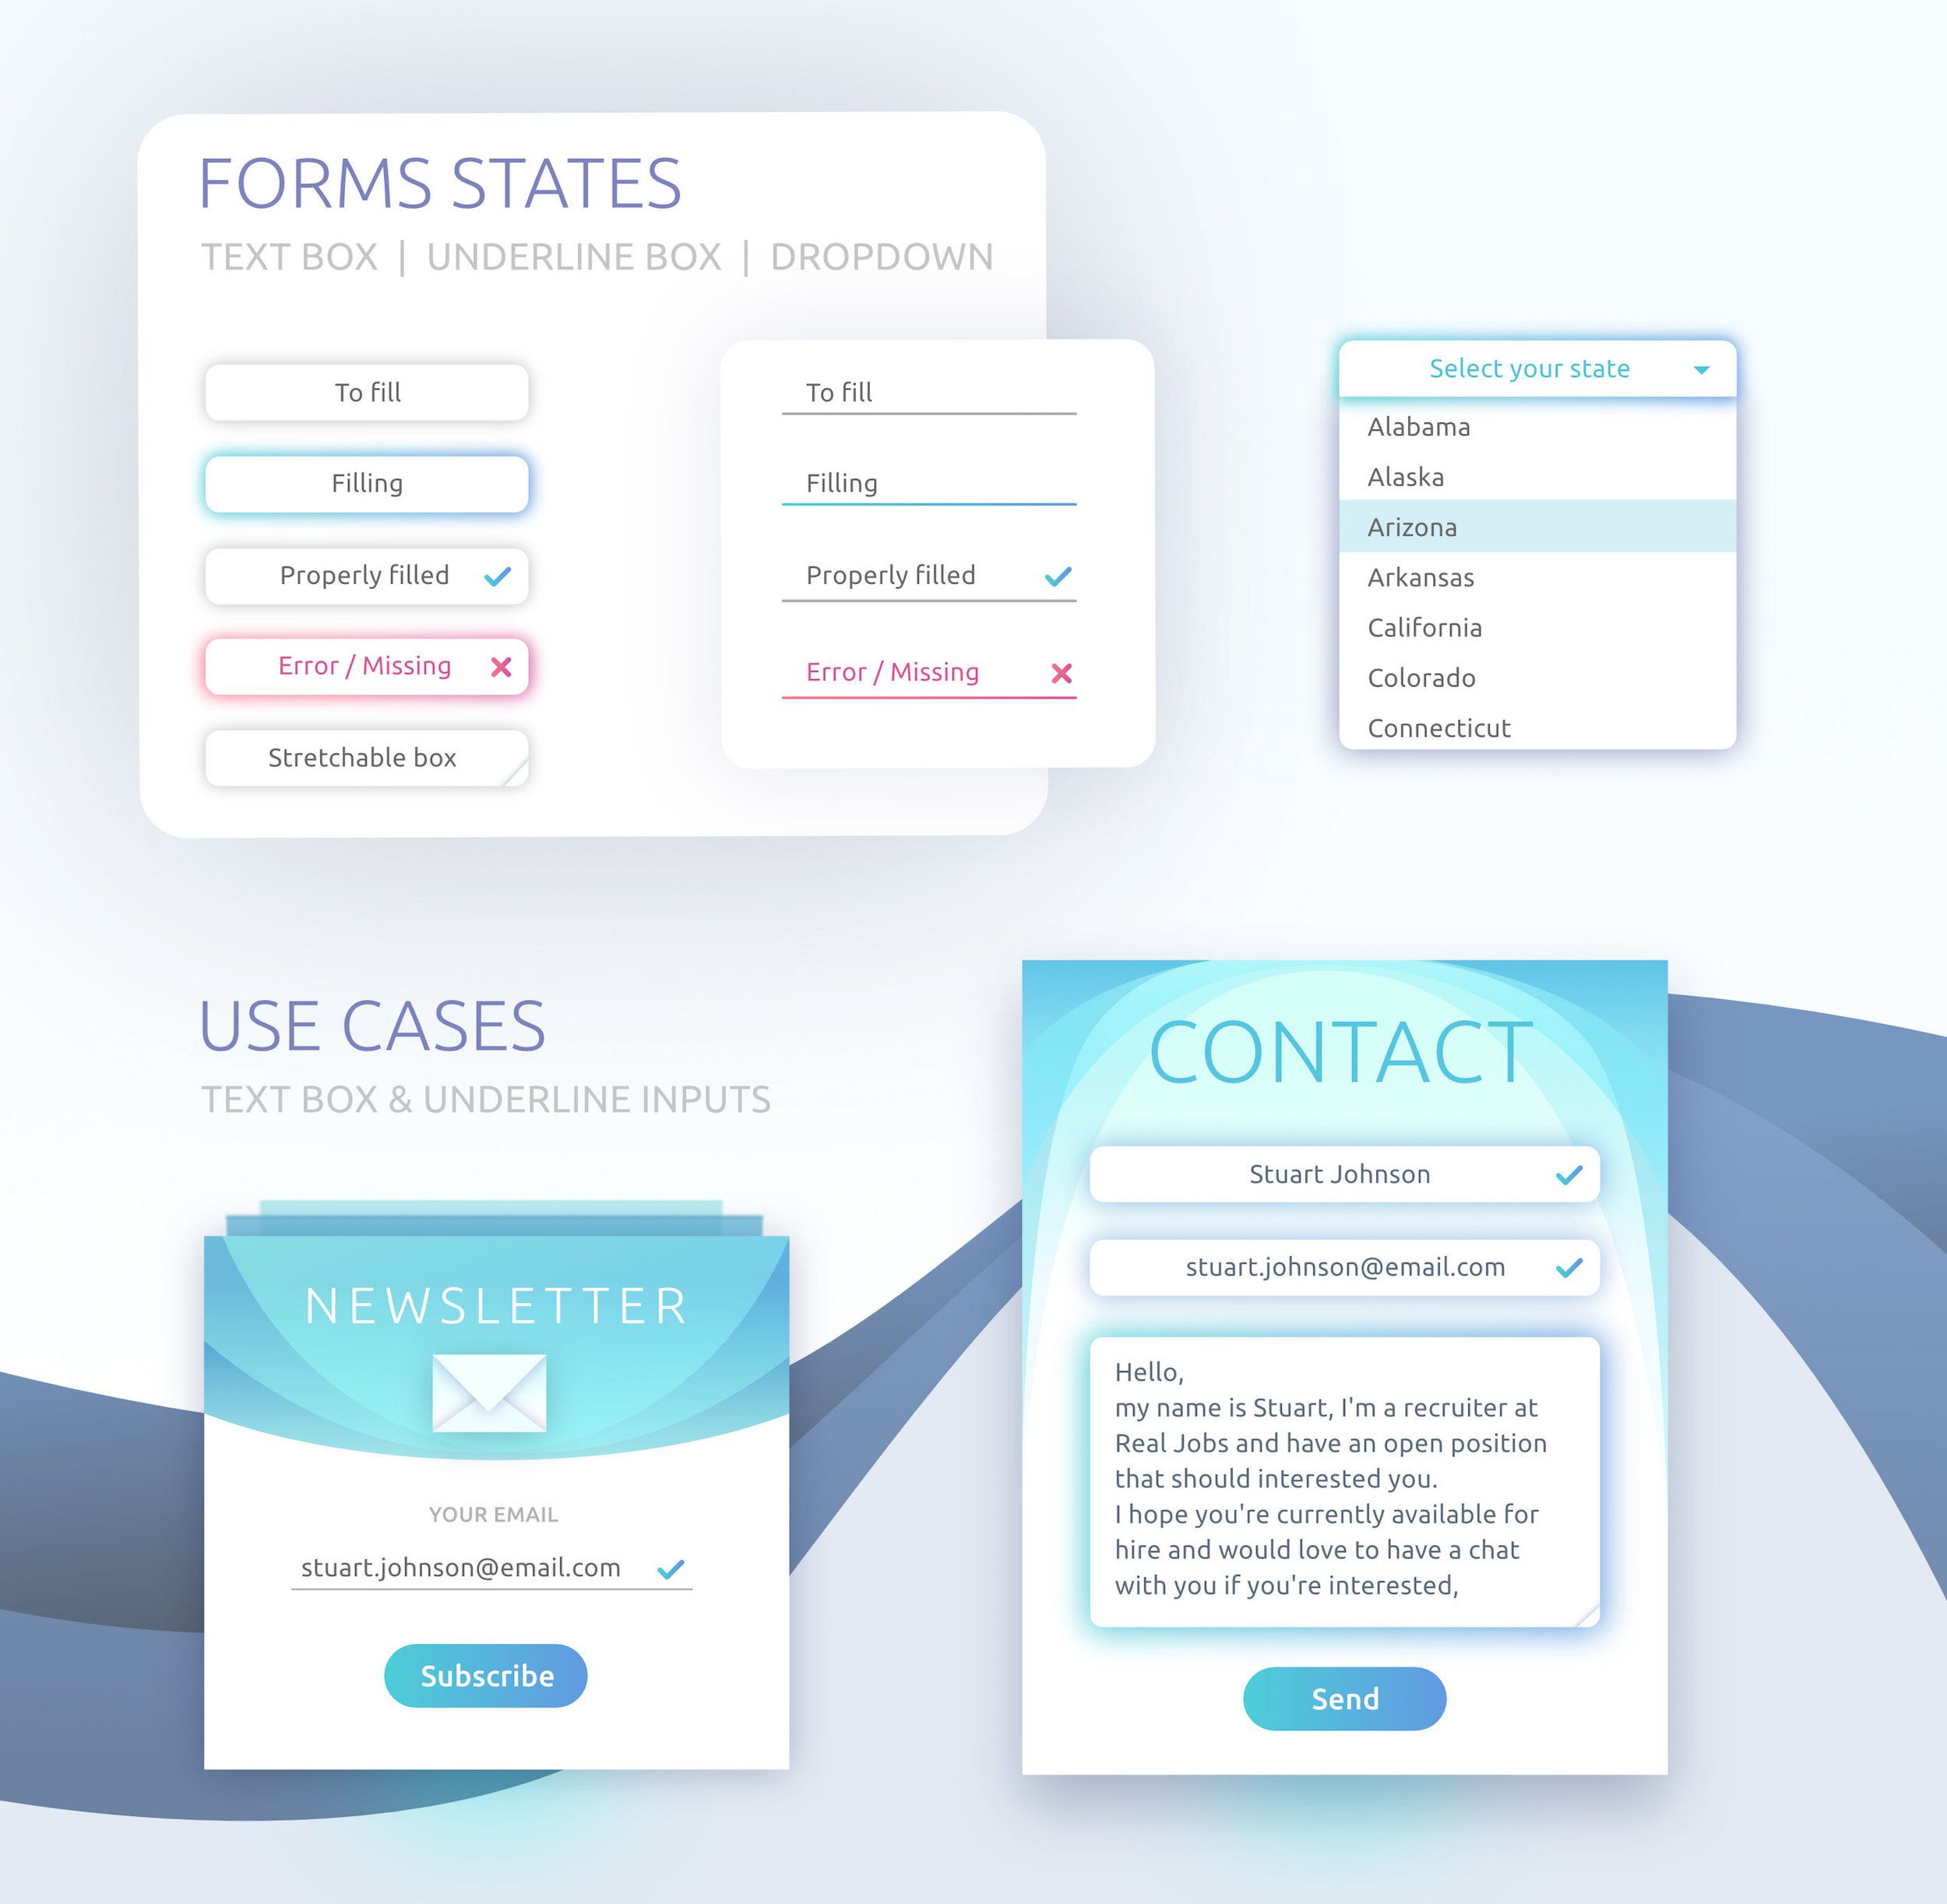 Luvly UI Kit by Meg Wehrlen including charts, buttons, animations, colors, fonts, screens, forms, dropdown, etc. Categories: UIUX, UI kit design, web